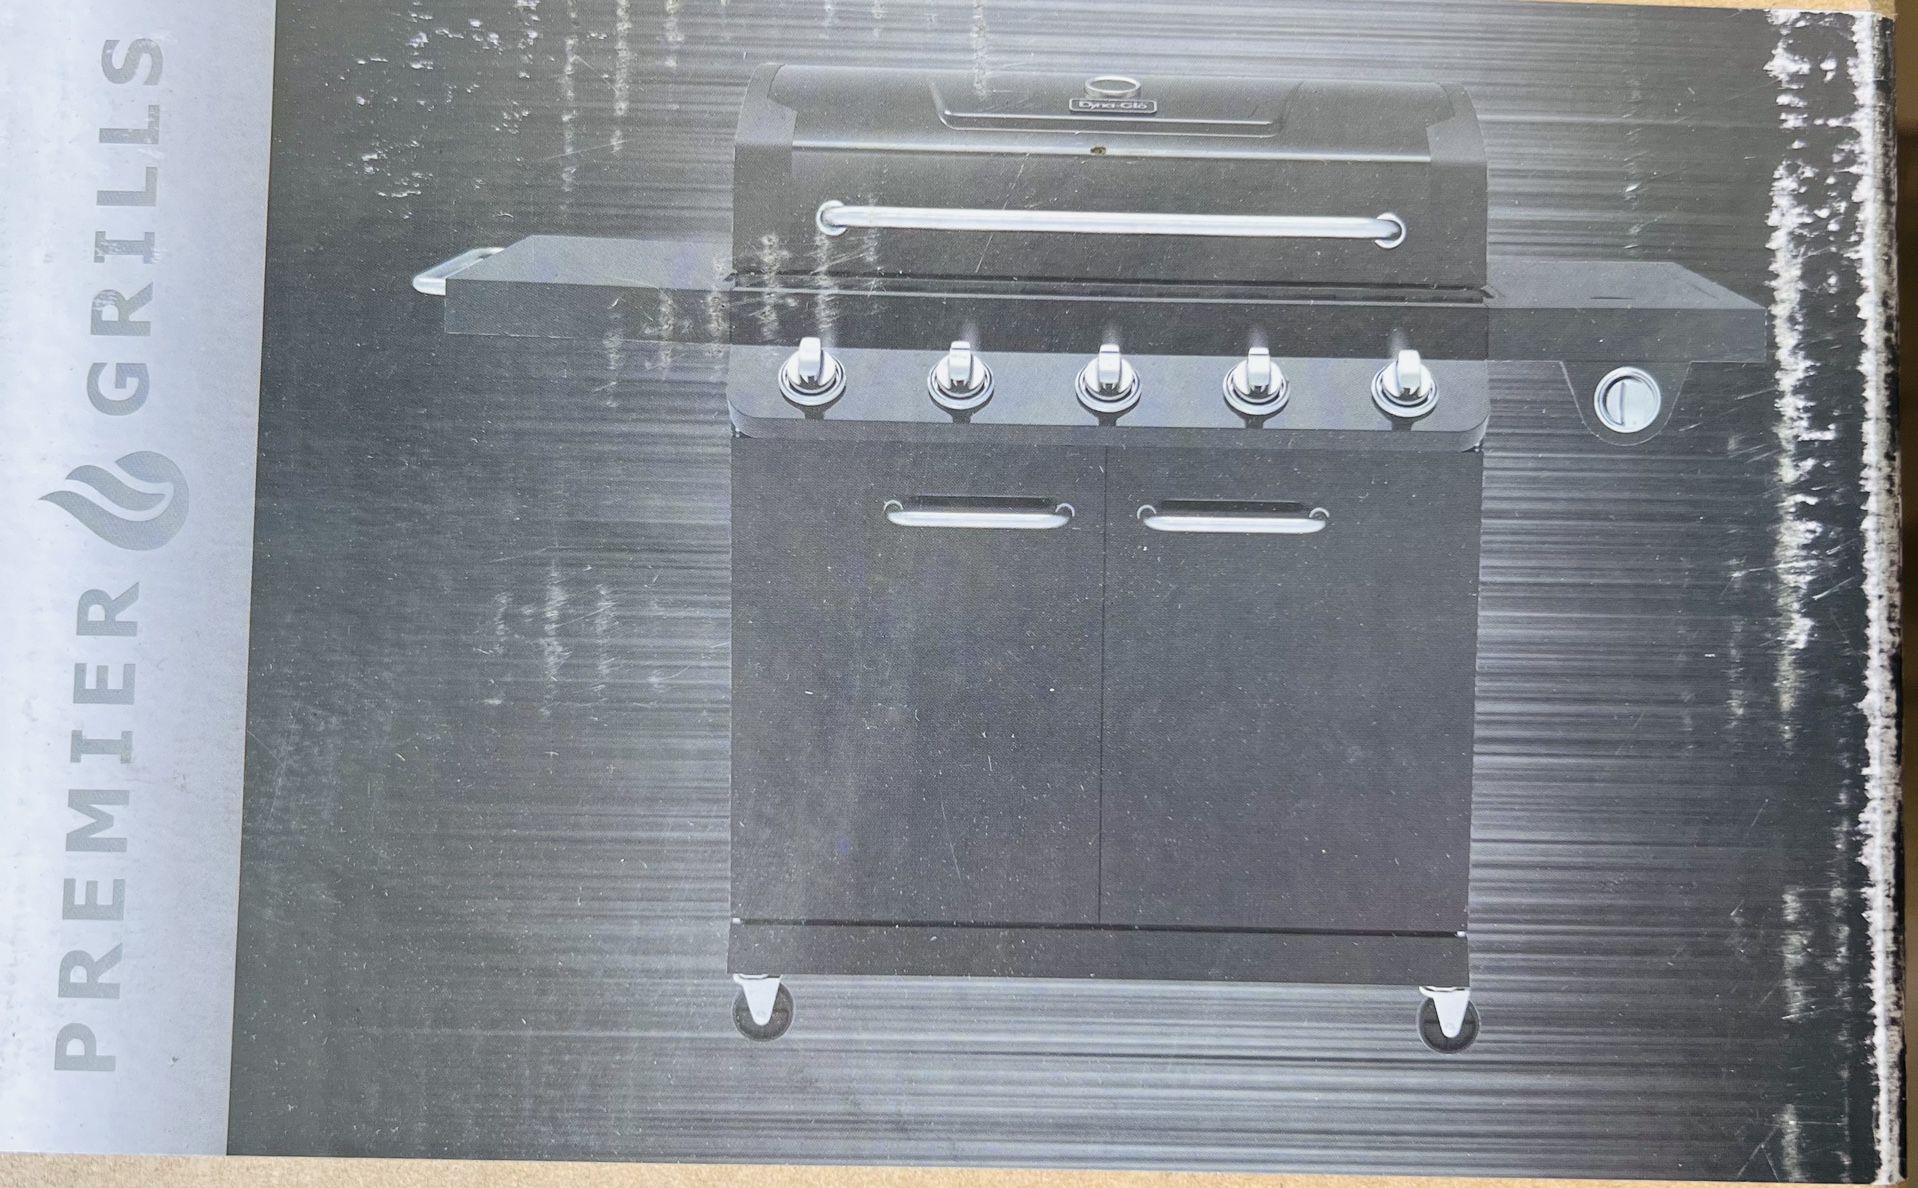 Deluxe BBQ Grill with 5+1 Burners